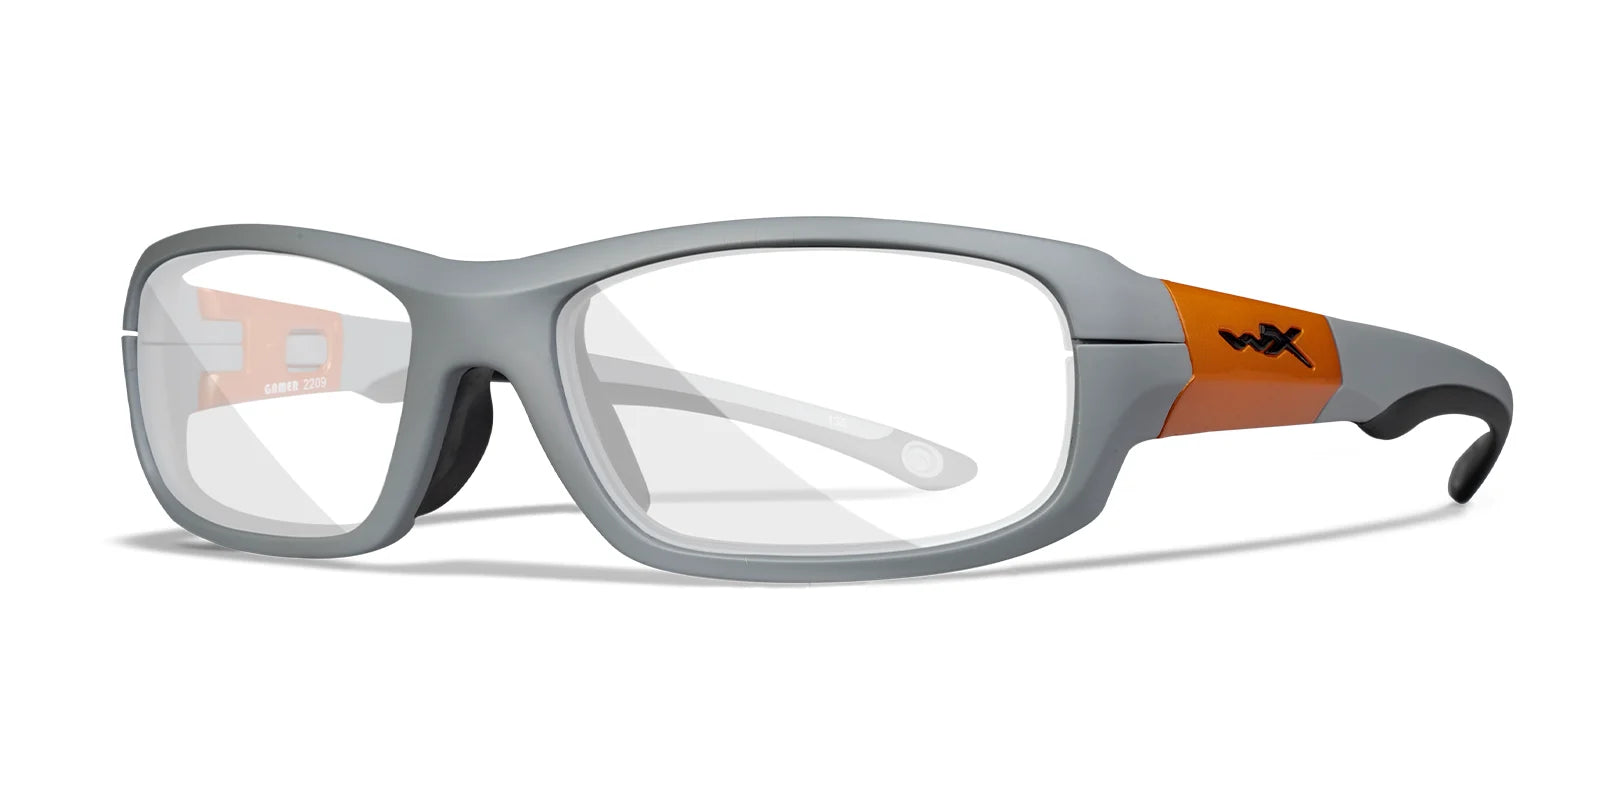 Wiley X GAMER Eyeglasses Matte Grey with Gloss Orange Frame / Clear